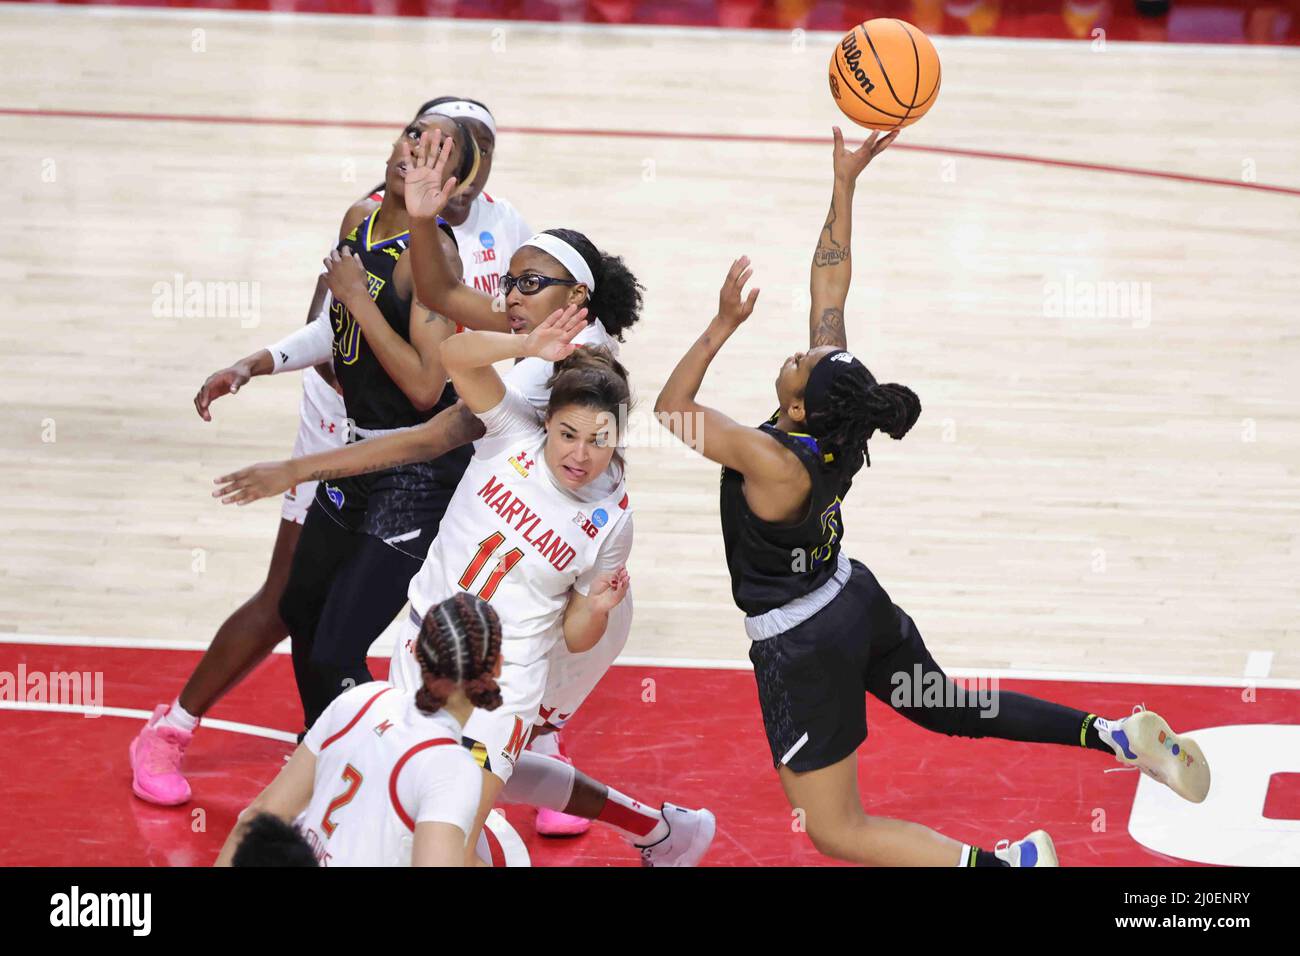 College Park, MD, USA. 18th Mar, 2022. Delaware guard TYI SKINNER (3) drives to the basket as Maryland guard KATIE BENZAN (11) looks on defends during the opening round of the women's NCAA tournament between between No. 13 Delaware and No. 4 Maryland Friday, March 18, 2022; at the Xfinity Center on the campus of the University of Maryland in College Park, MD. Credit: ZUMA Press, Inc./Alamy Live News Stock Photo